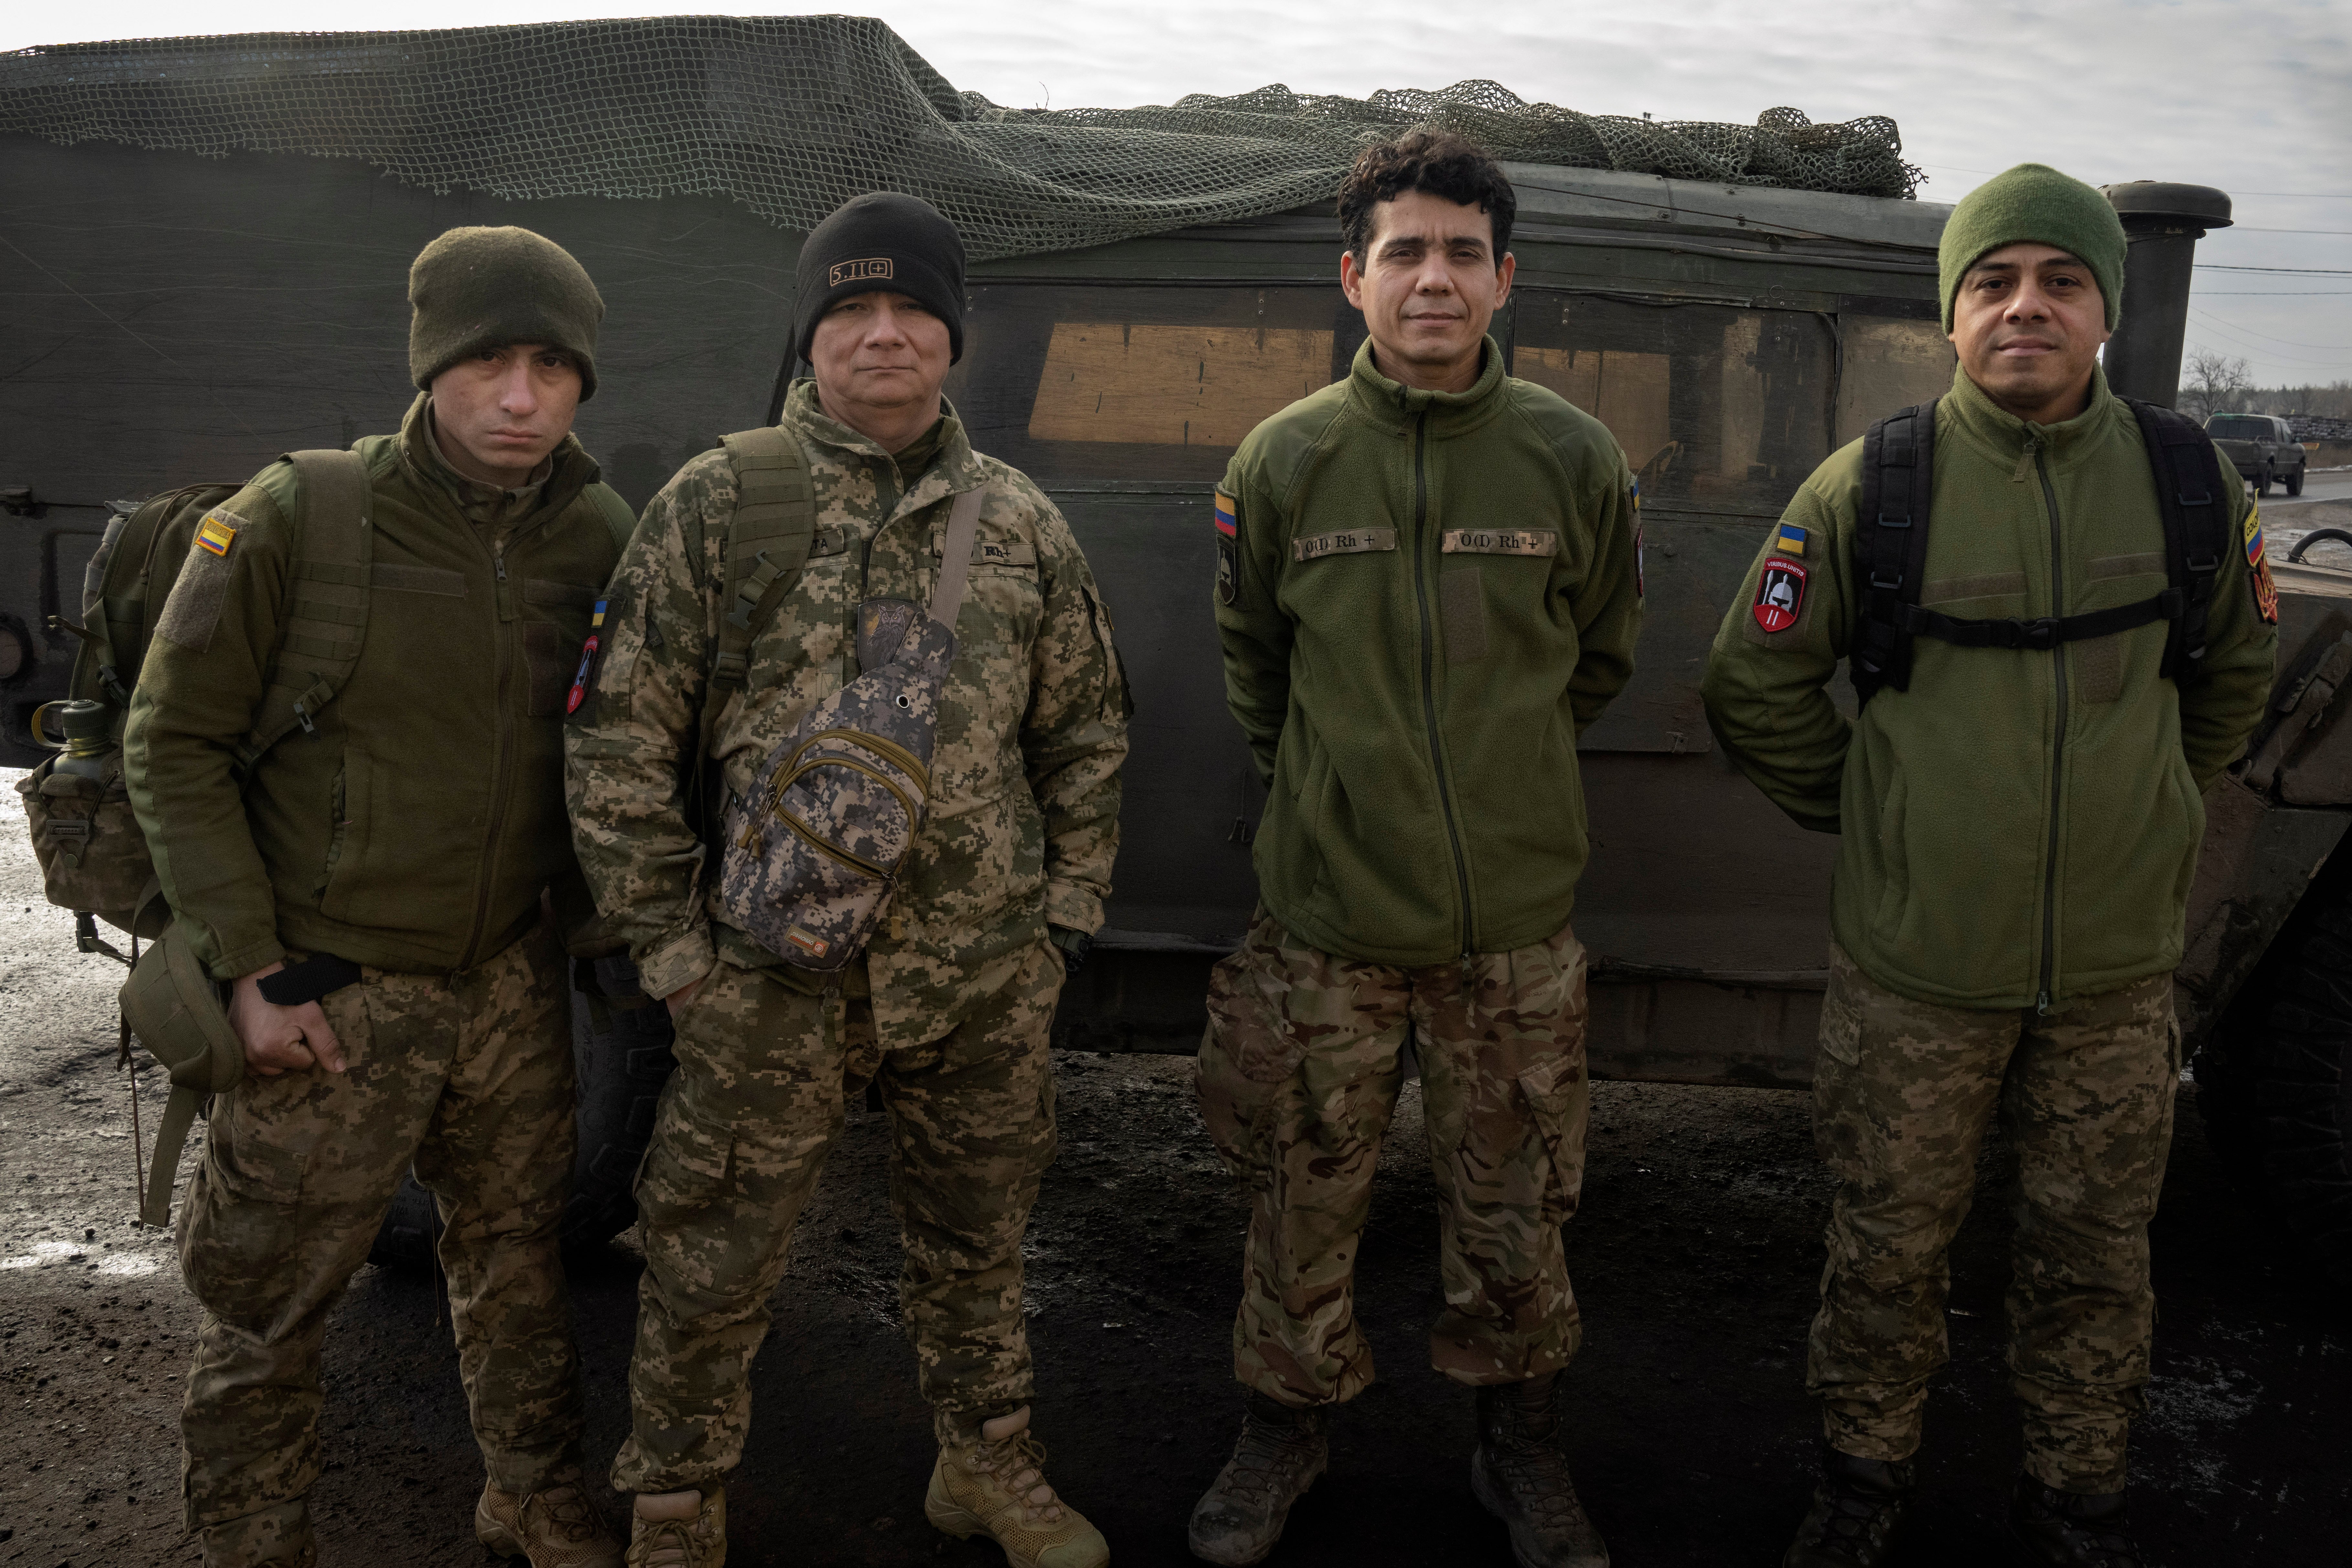 Colombian veterans who joined the Ukrainian armed forces to help fight Russia pose for a photo near their Humvee